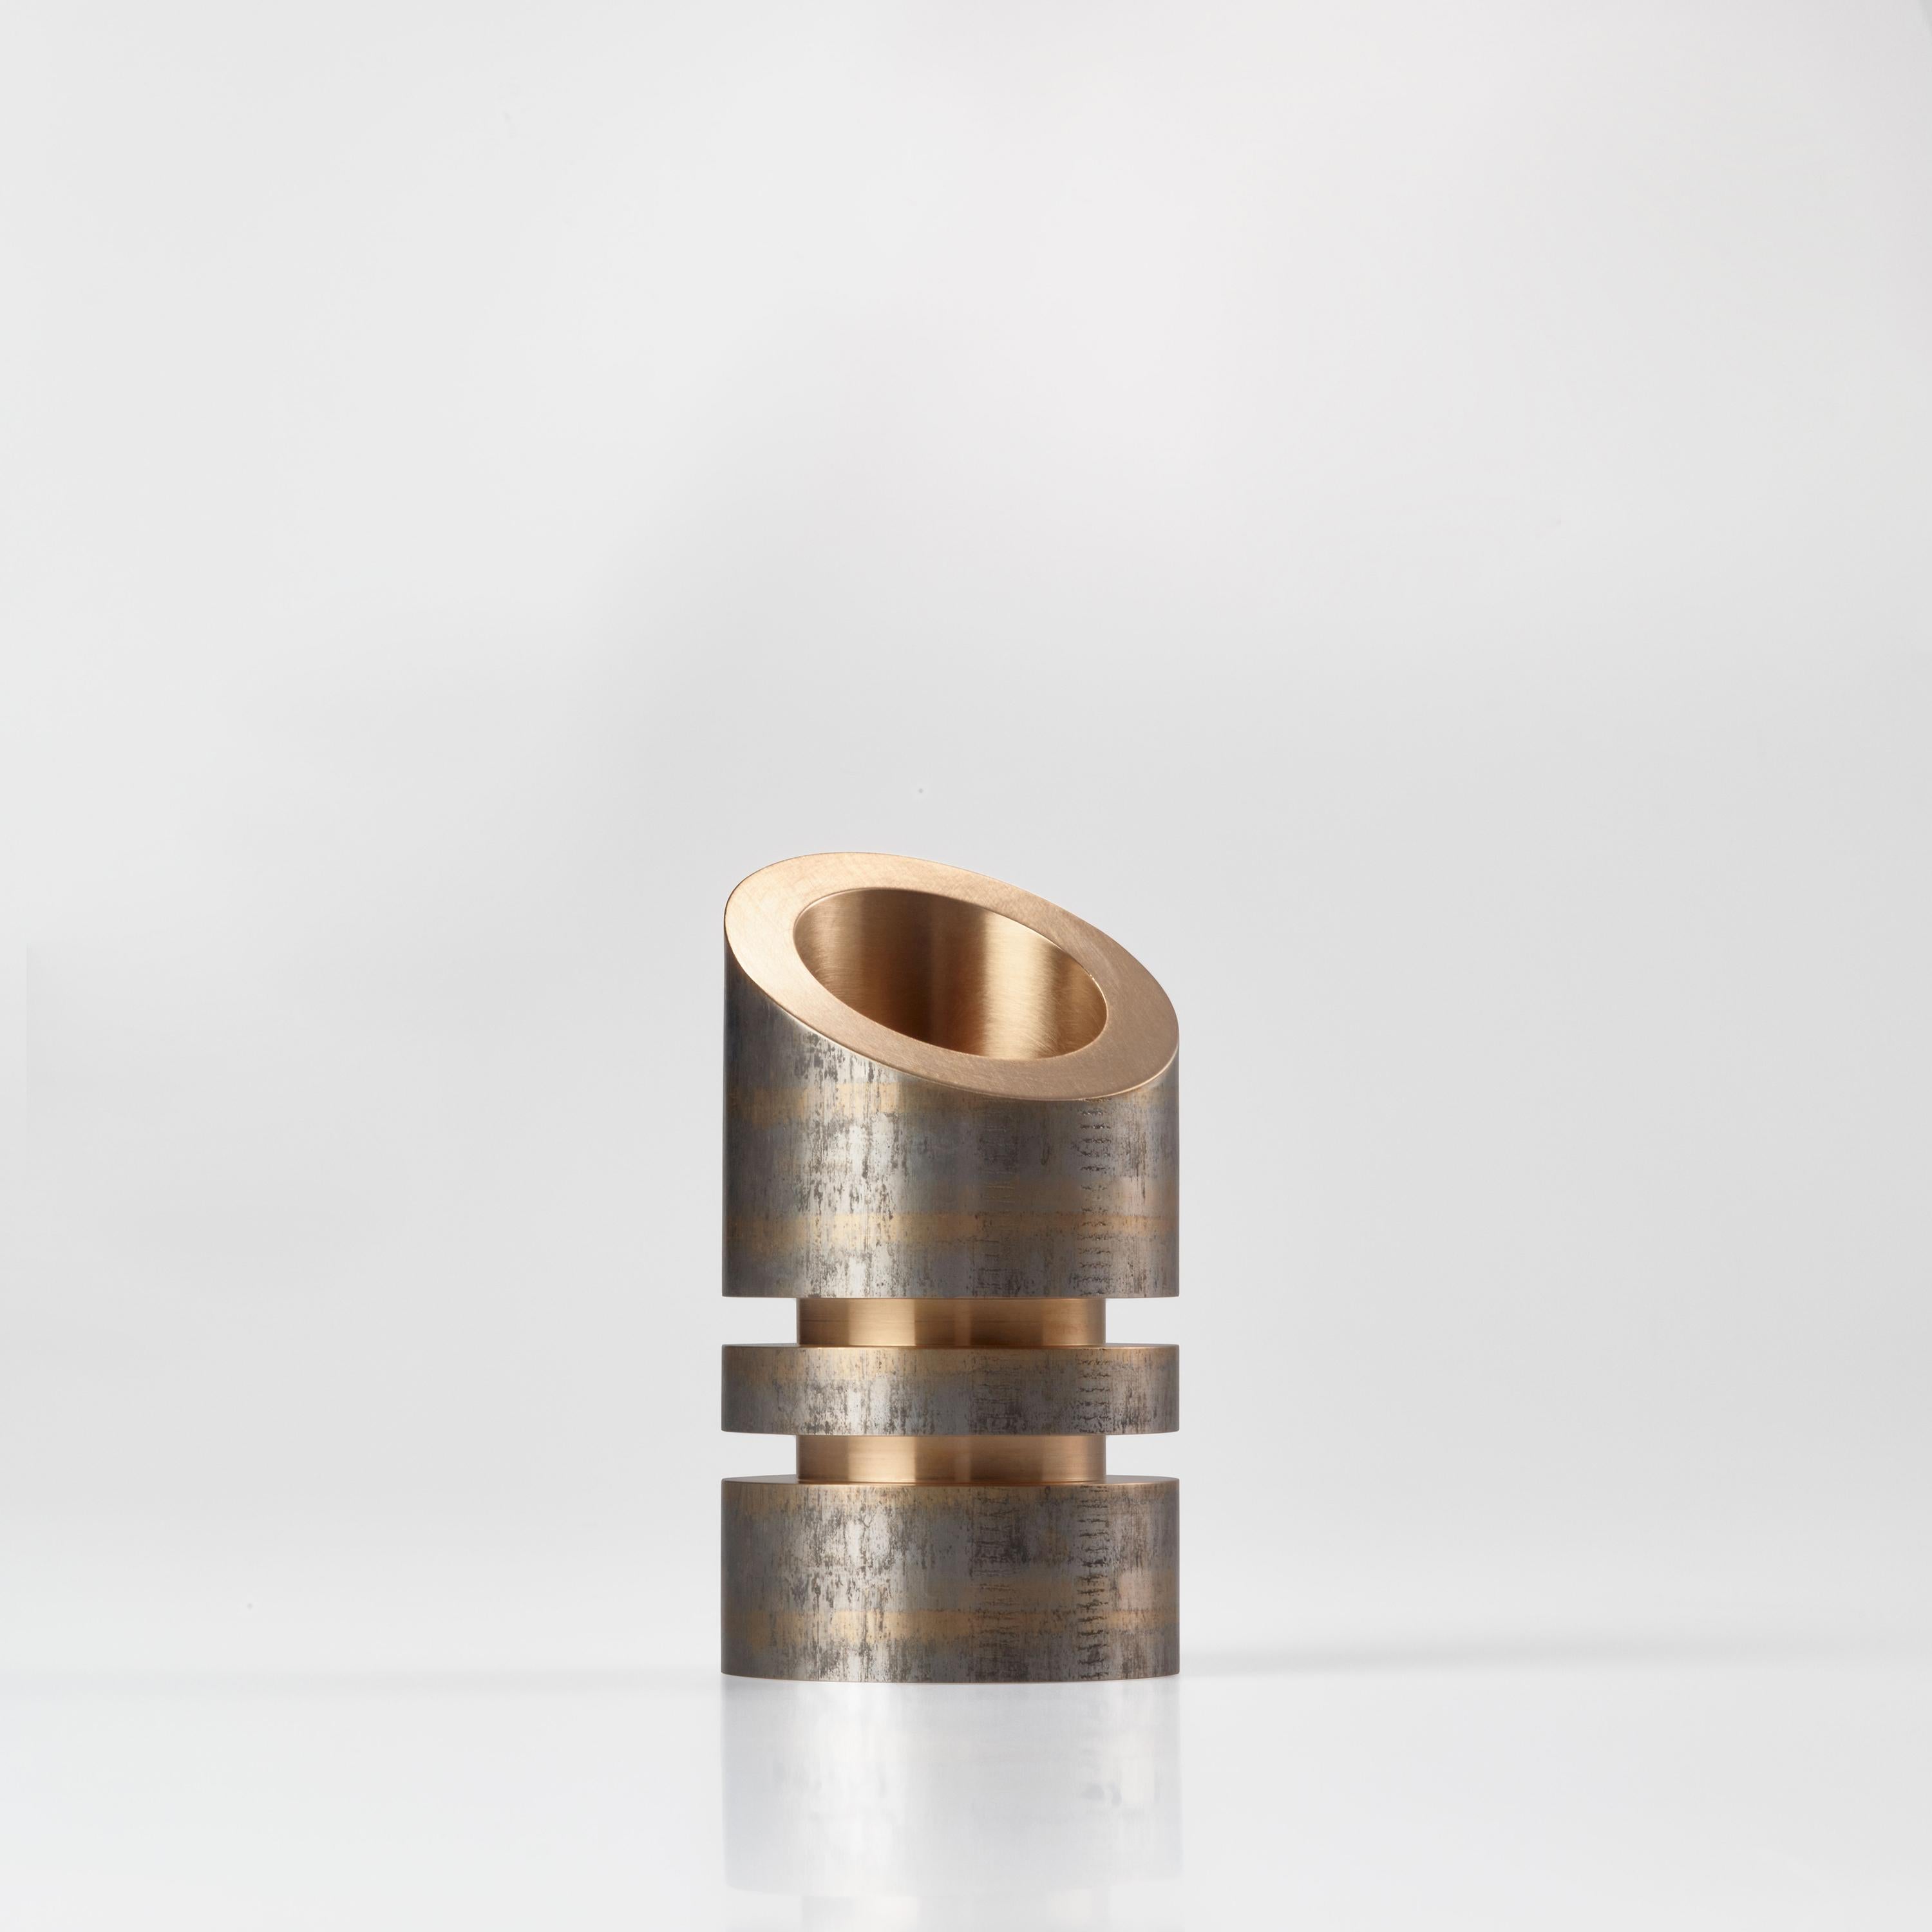 Under pressure is one of three new collection pieces created by the young French designer from Bordeau, William Guillon.
This paper weight, which can also be used as a small candlestick, is made from a massive block of patinated bronze. It can also